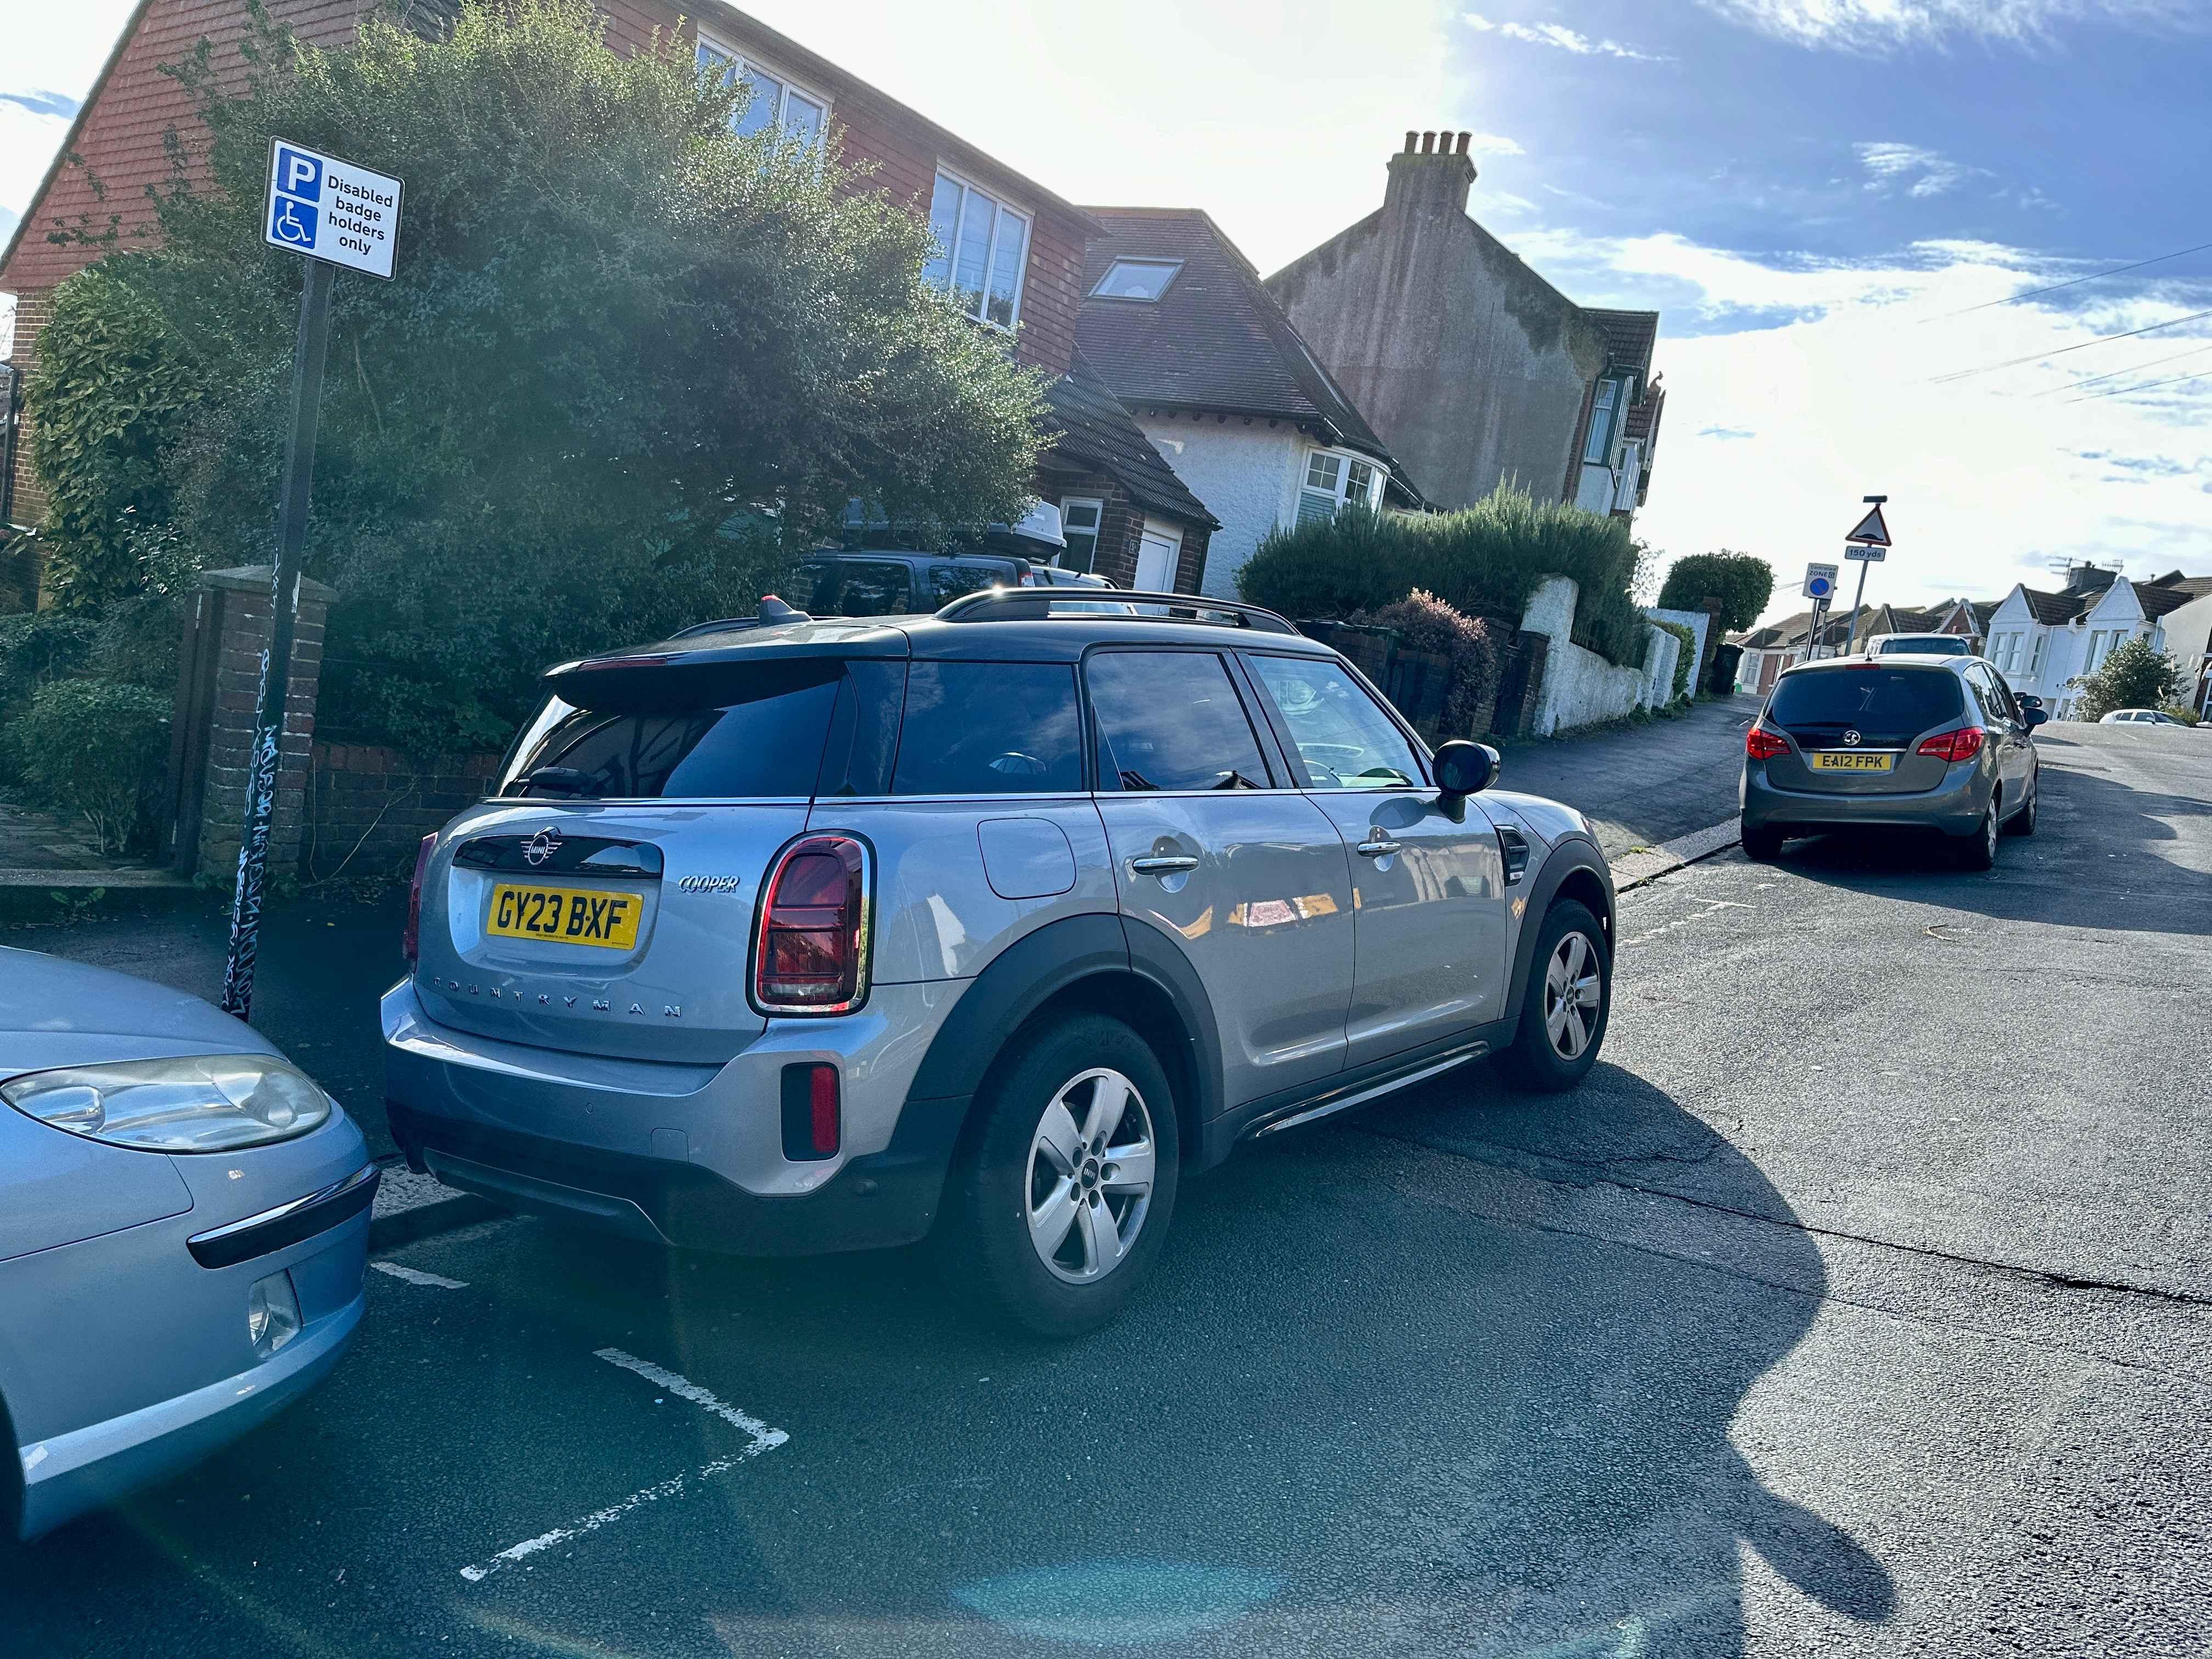 Photograph of GY23 BXF - a Grey Mini Countryman parked in Hollingdean by a non-resident who uses the local area as part of their Brighton commute. The fourth of eight photographs supplied by the residents of Hollingdean.